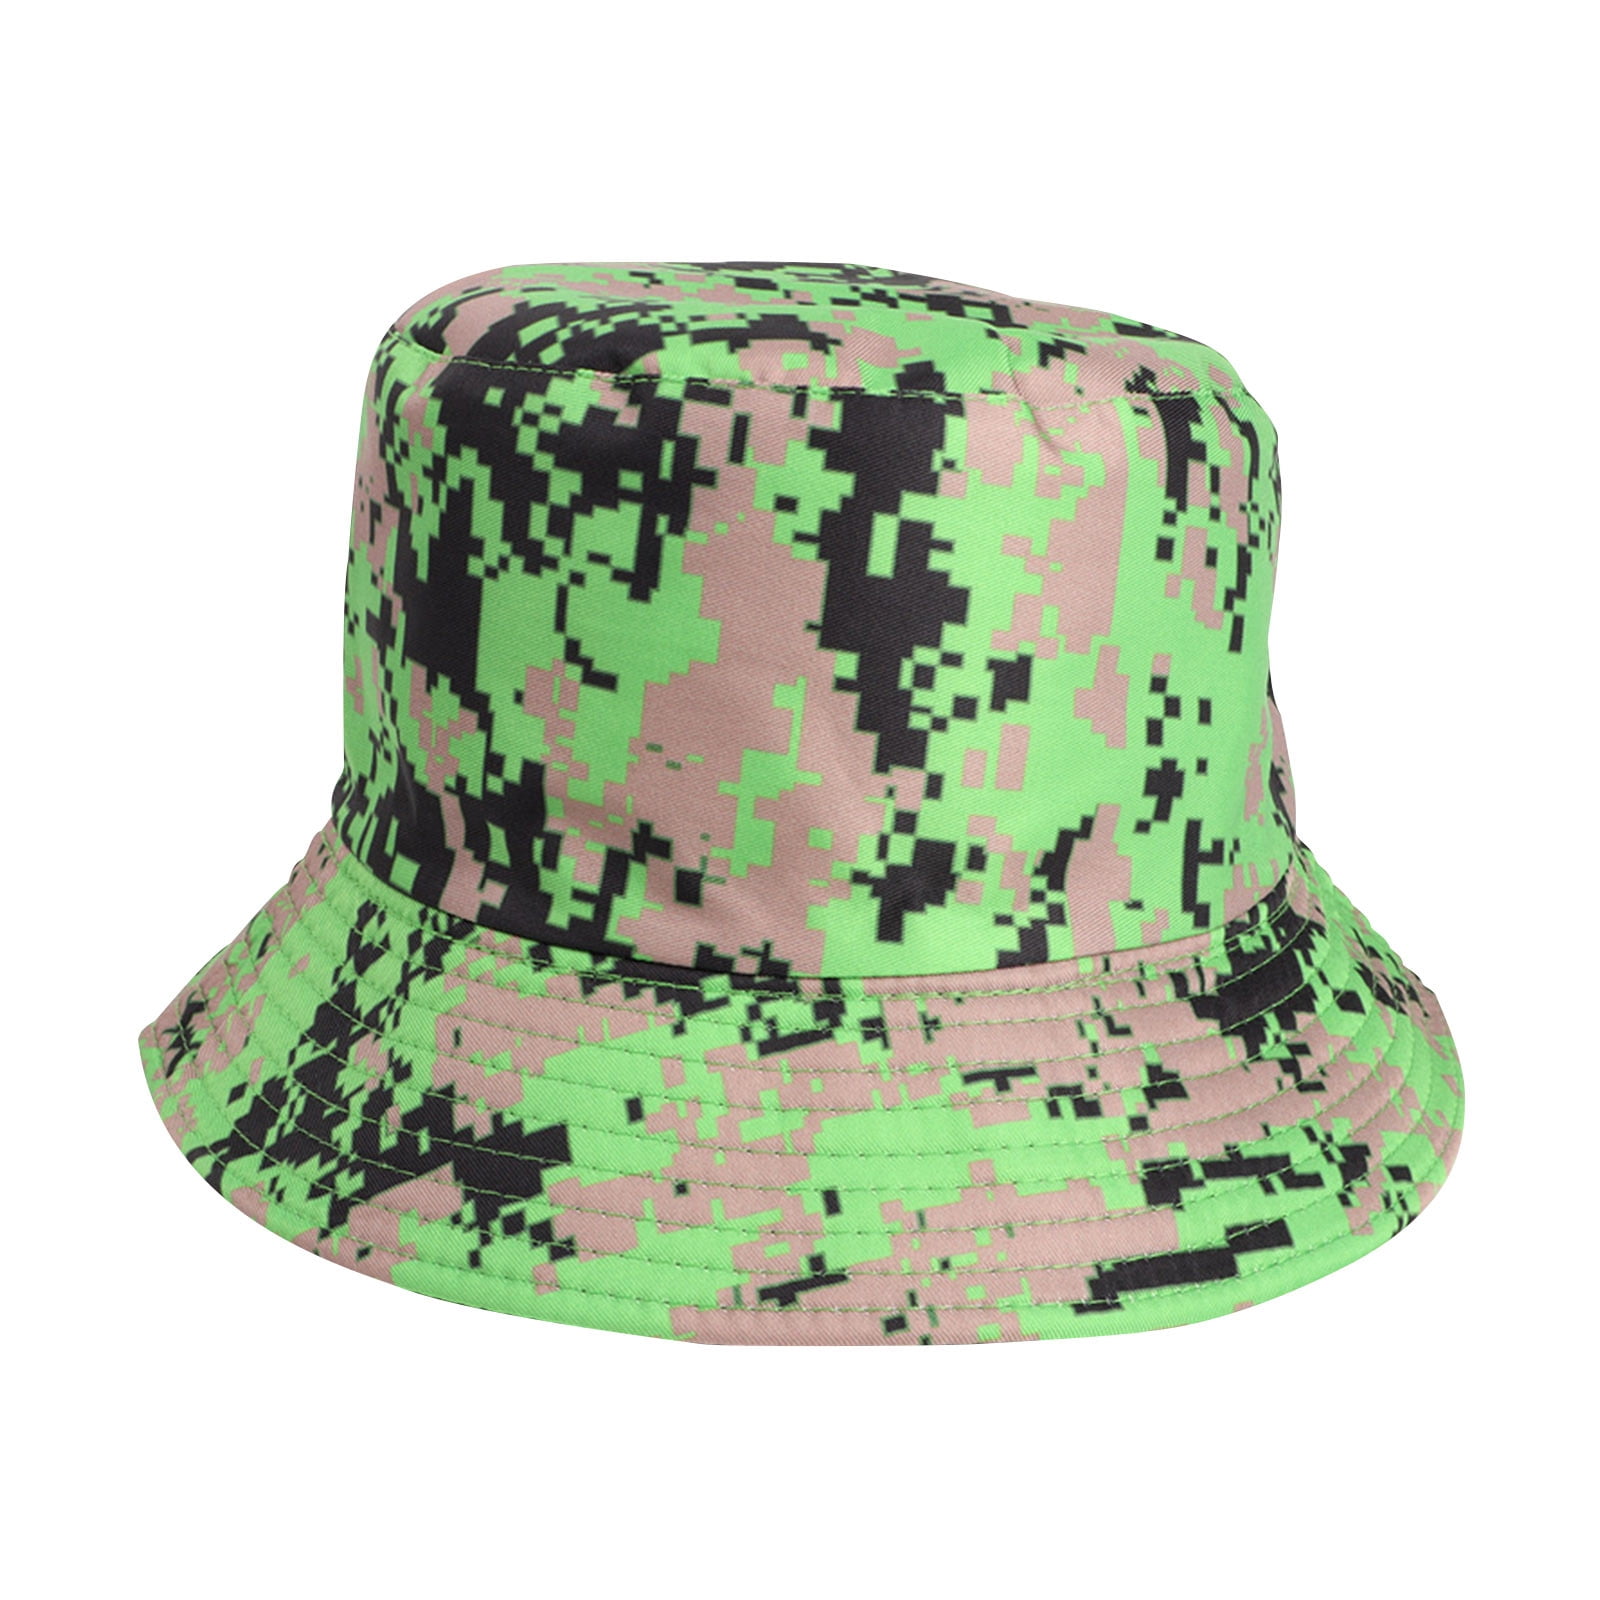 Kizly Sun Hat,Adult Male And Female Fisherman Hats Camouflage Pattern ...